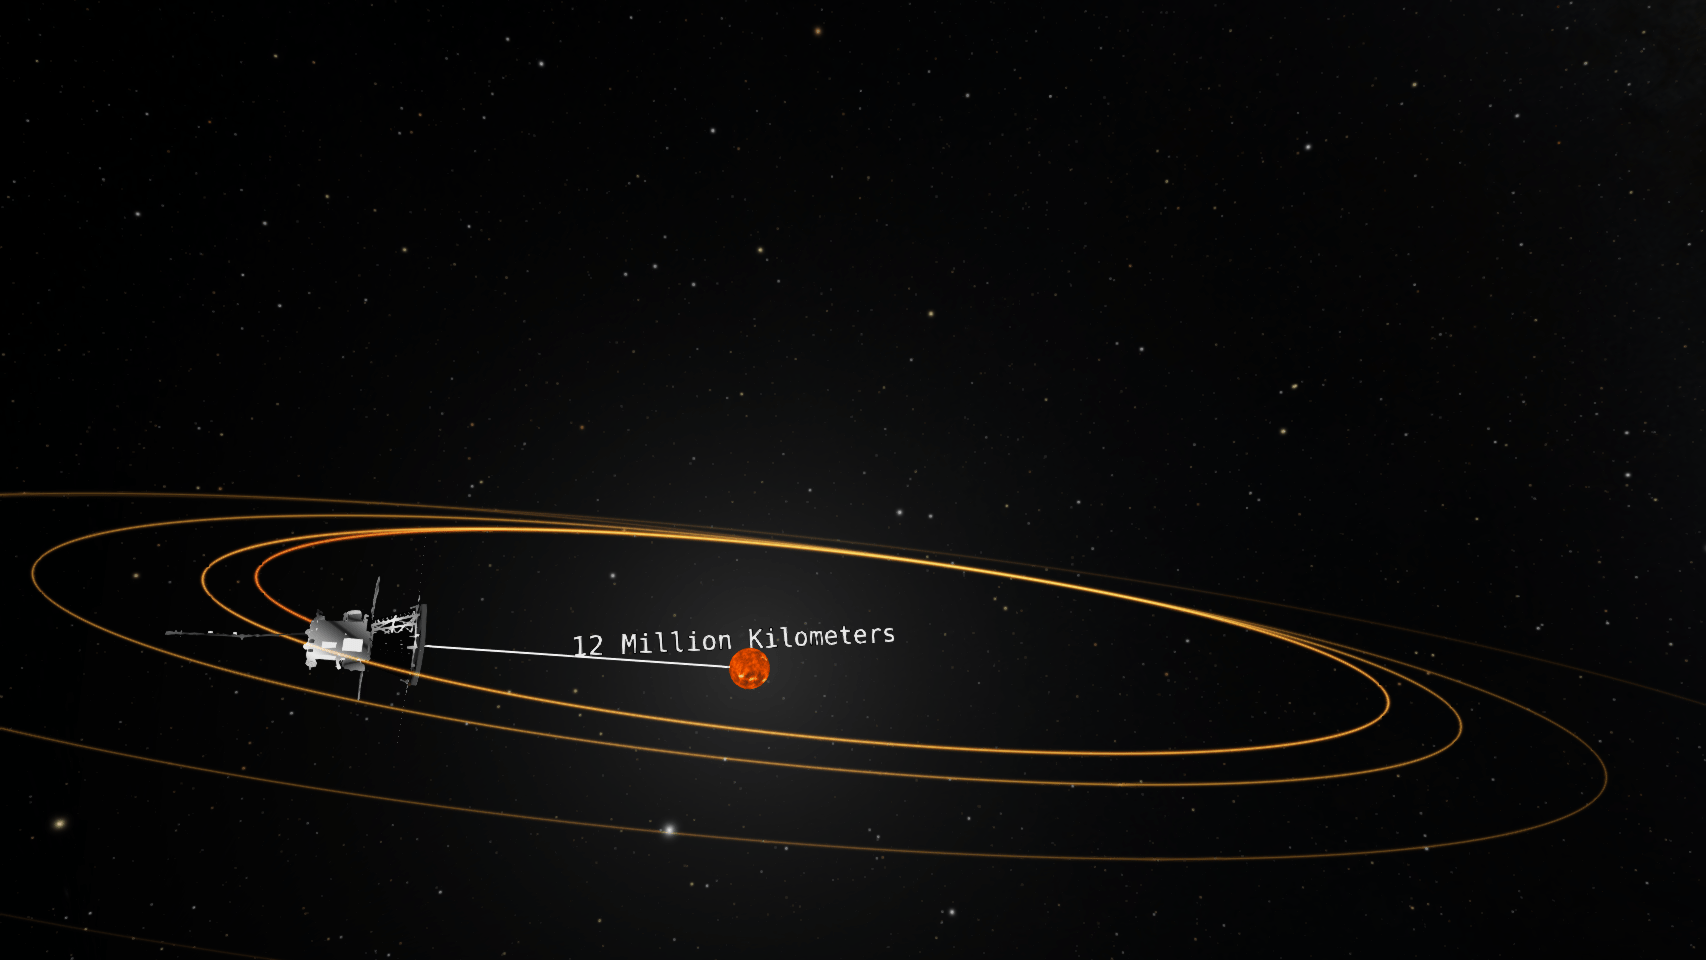 A 3D model of the Parker Solar Probe orbiting the Sun. Orange lines depict the spacecraft's trajectory around the Sun. The spacecraft is shown to be 12 million kilometers away from the Sun. The Parker Solar Probe model is enlarged to show details. This image was created using OpenSpace software.